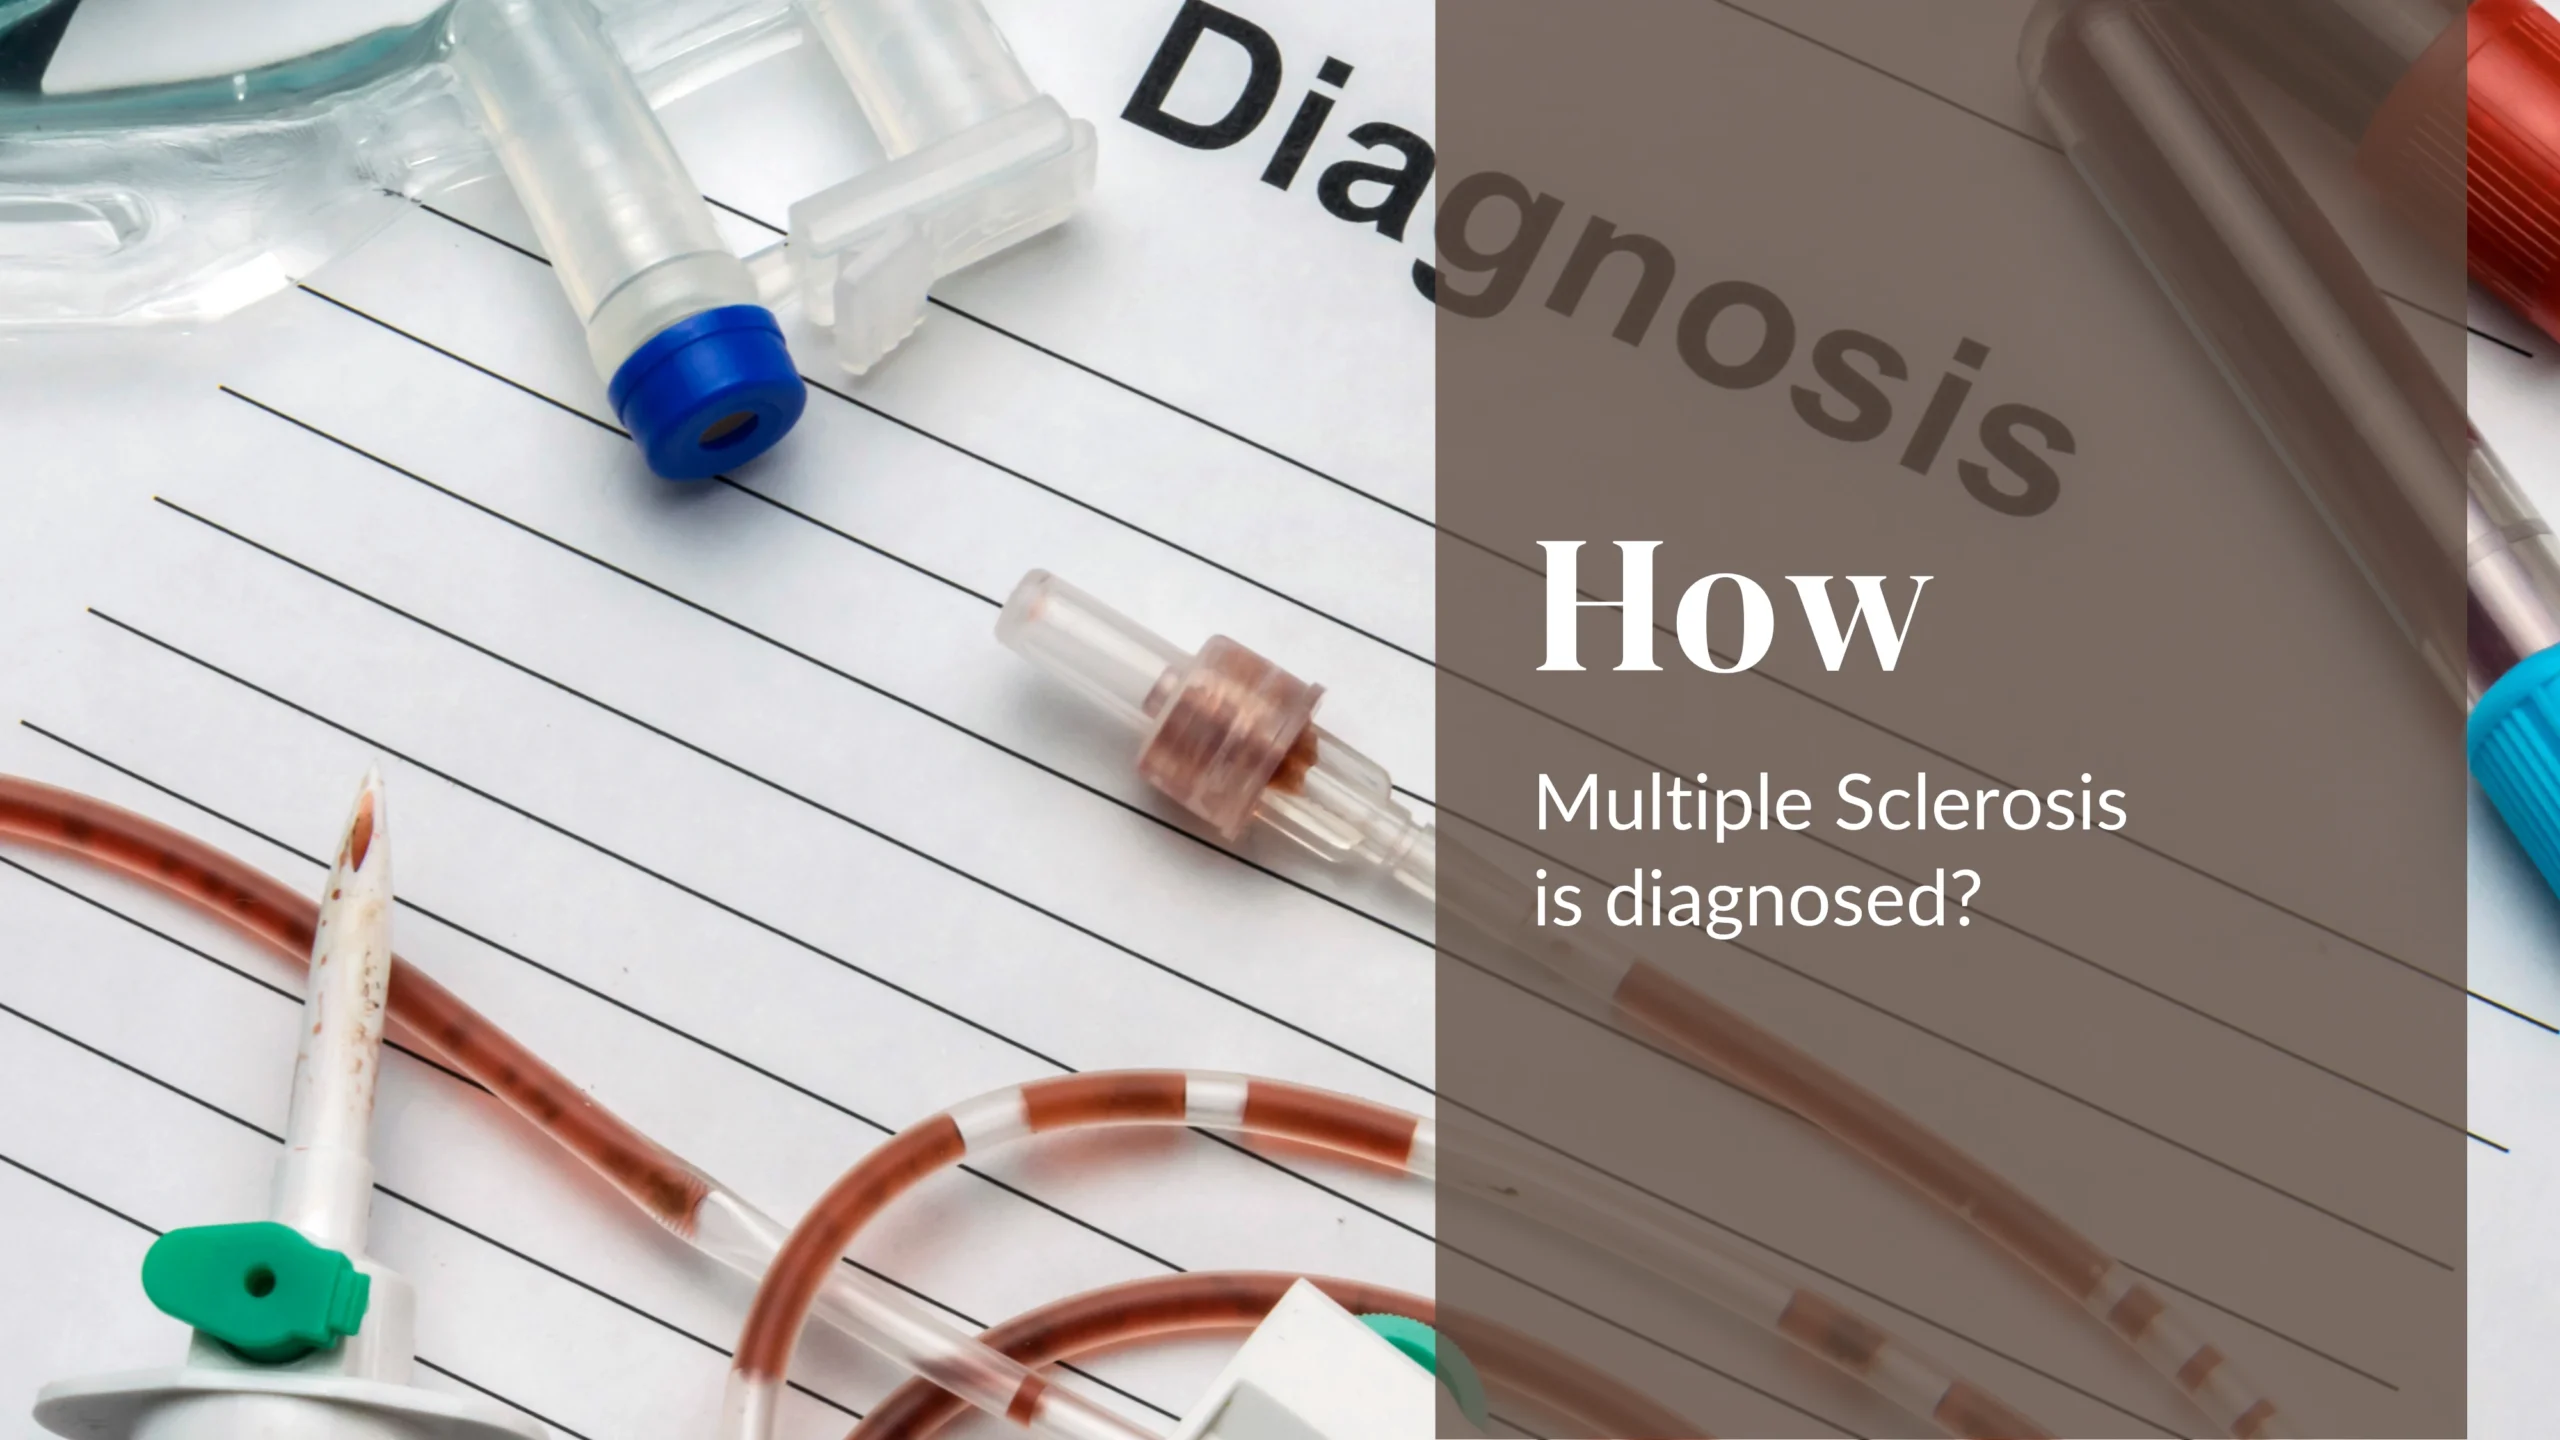 How multiple sclerosis is diagnosed